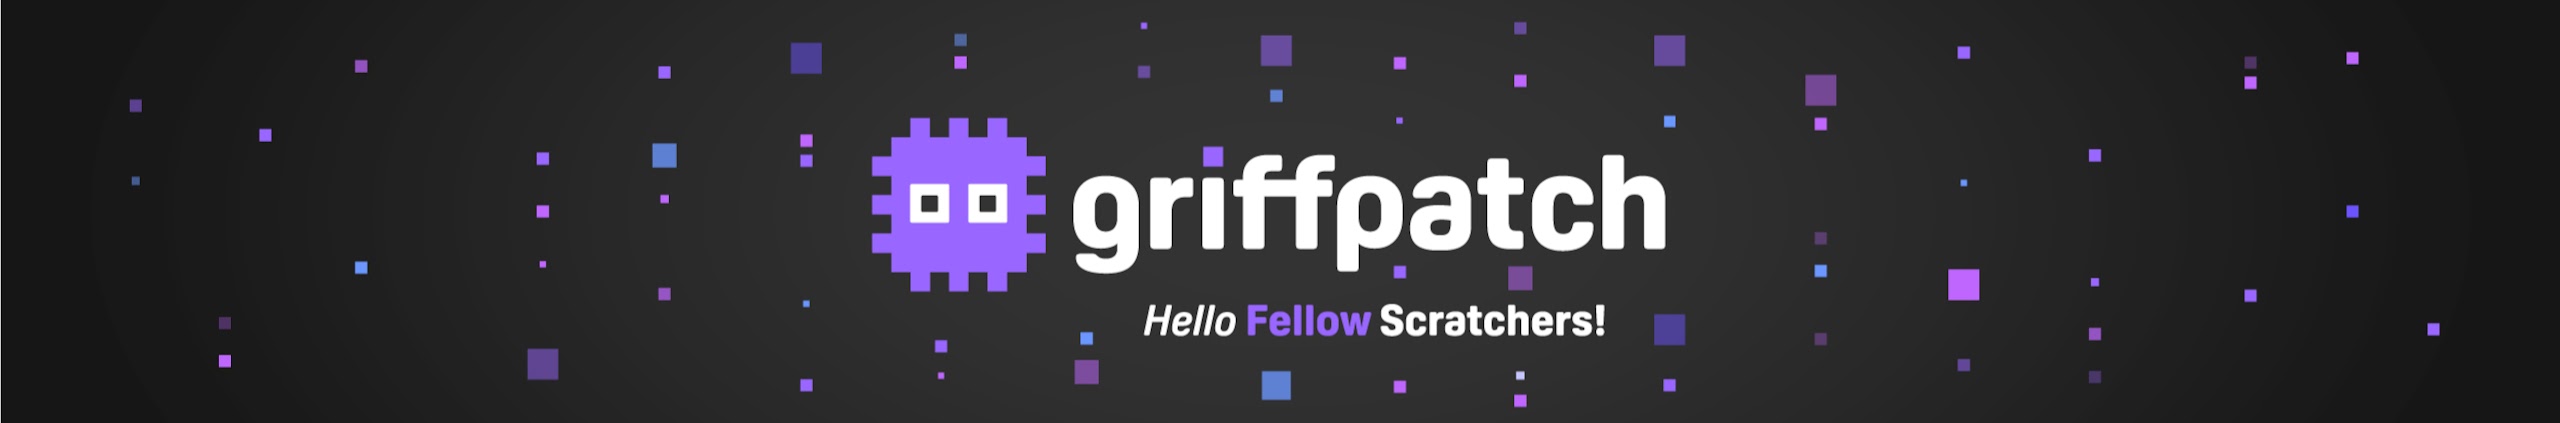 griffpatch